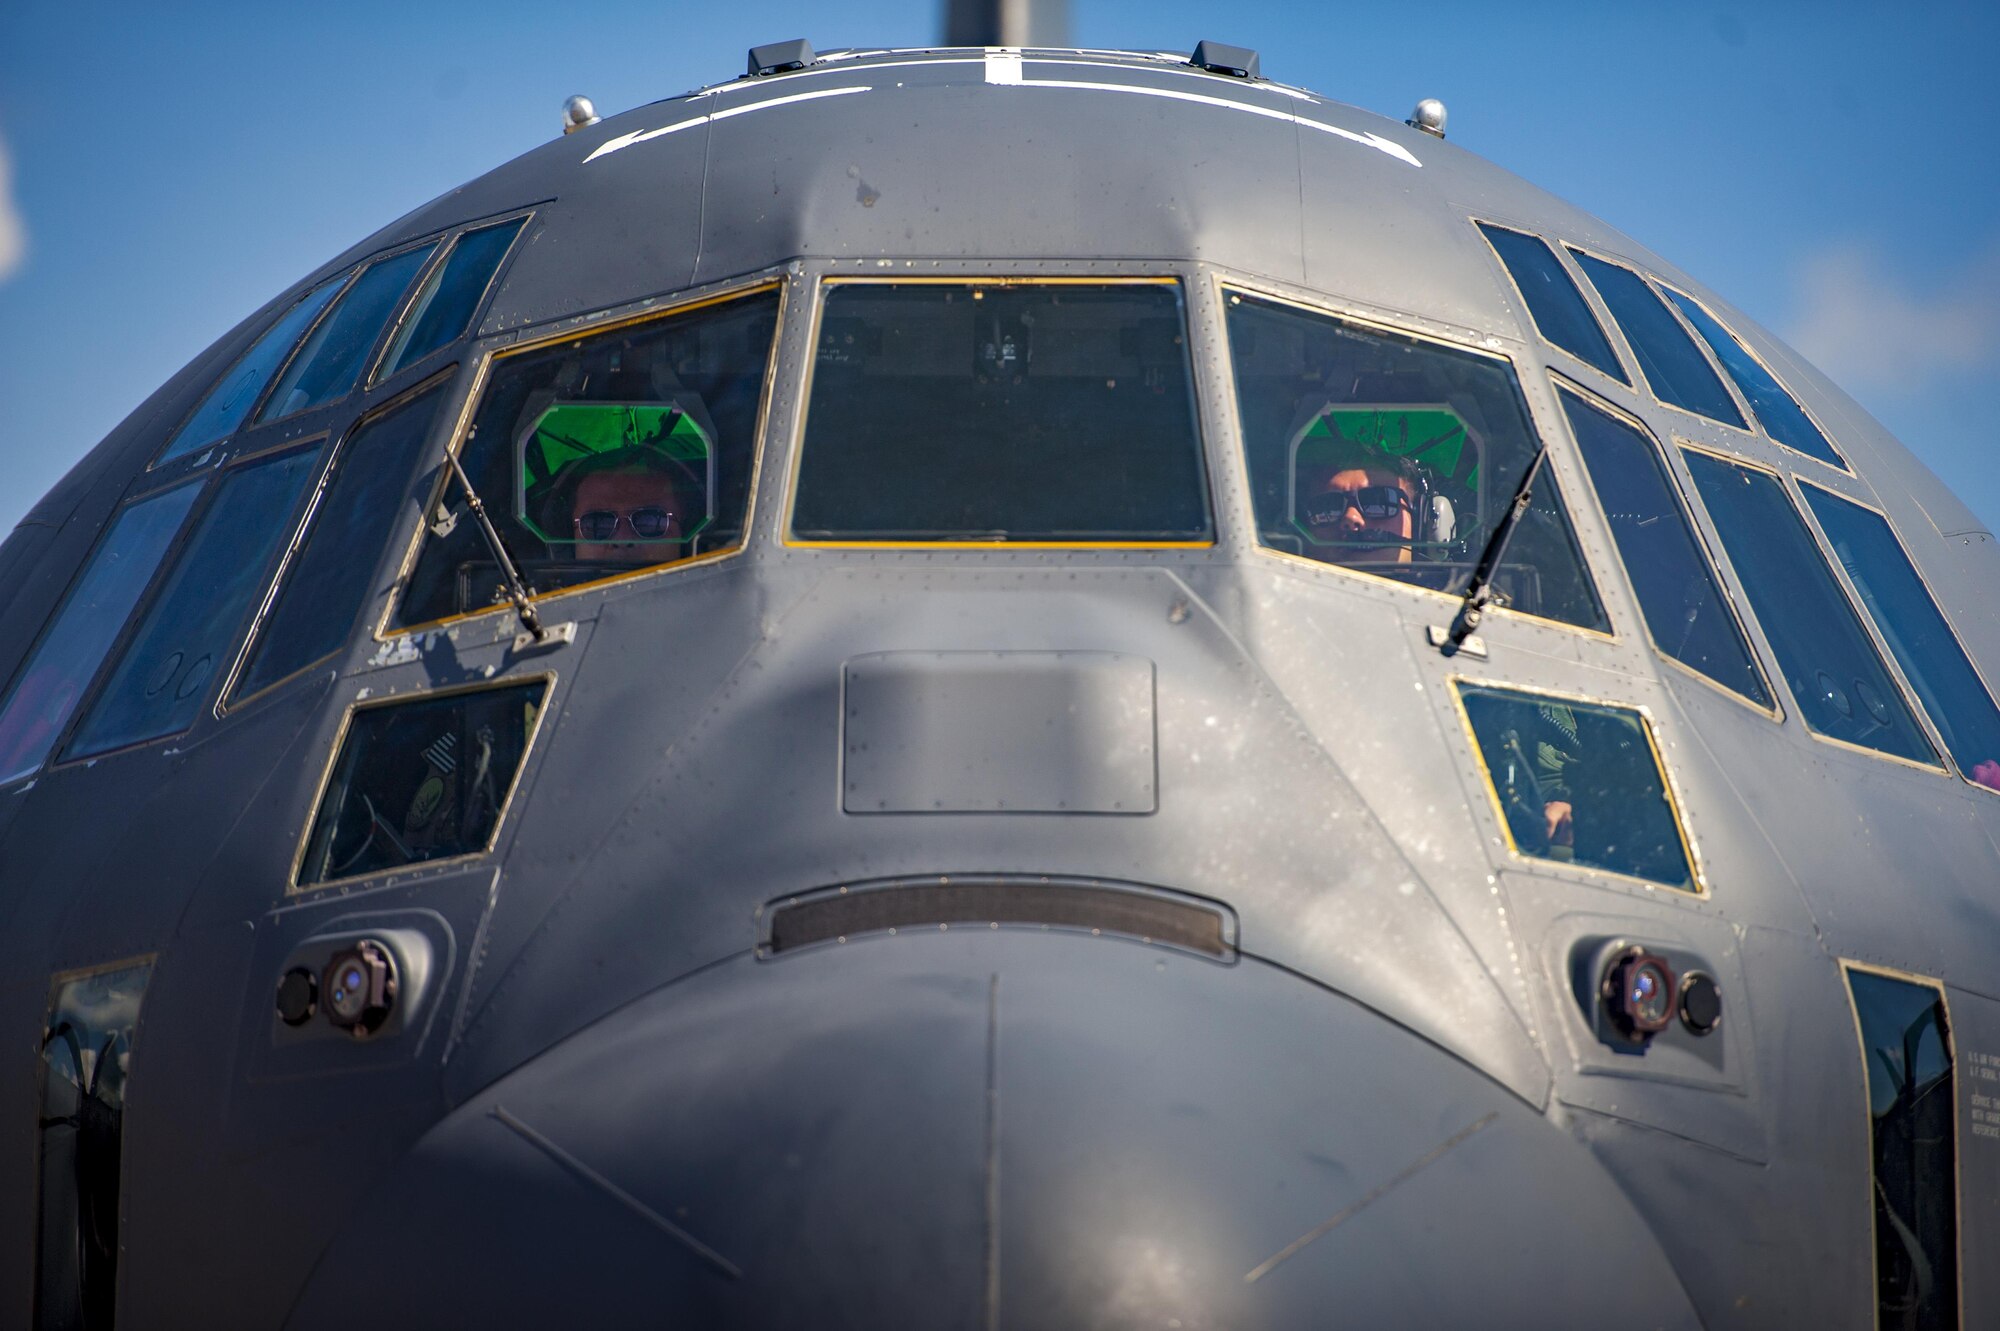 Pilots from the 71st Rescue Squadron prepare for take-off in an HC-130J Combat King II, Aug. 17, 2017, at Moody Air Force Base, Ga. Maintainers perform various tasks prior to take-off such as pre-flight inspections, removing plugs and covers, repairing any problems found during crew pre-flight checks and marshalling the aircraft. (U.S. Air Force photo by Airman 1st Class Lauren M. Sprunk)